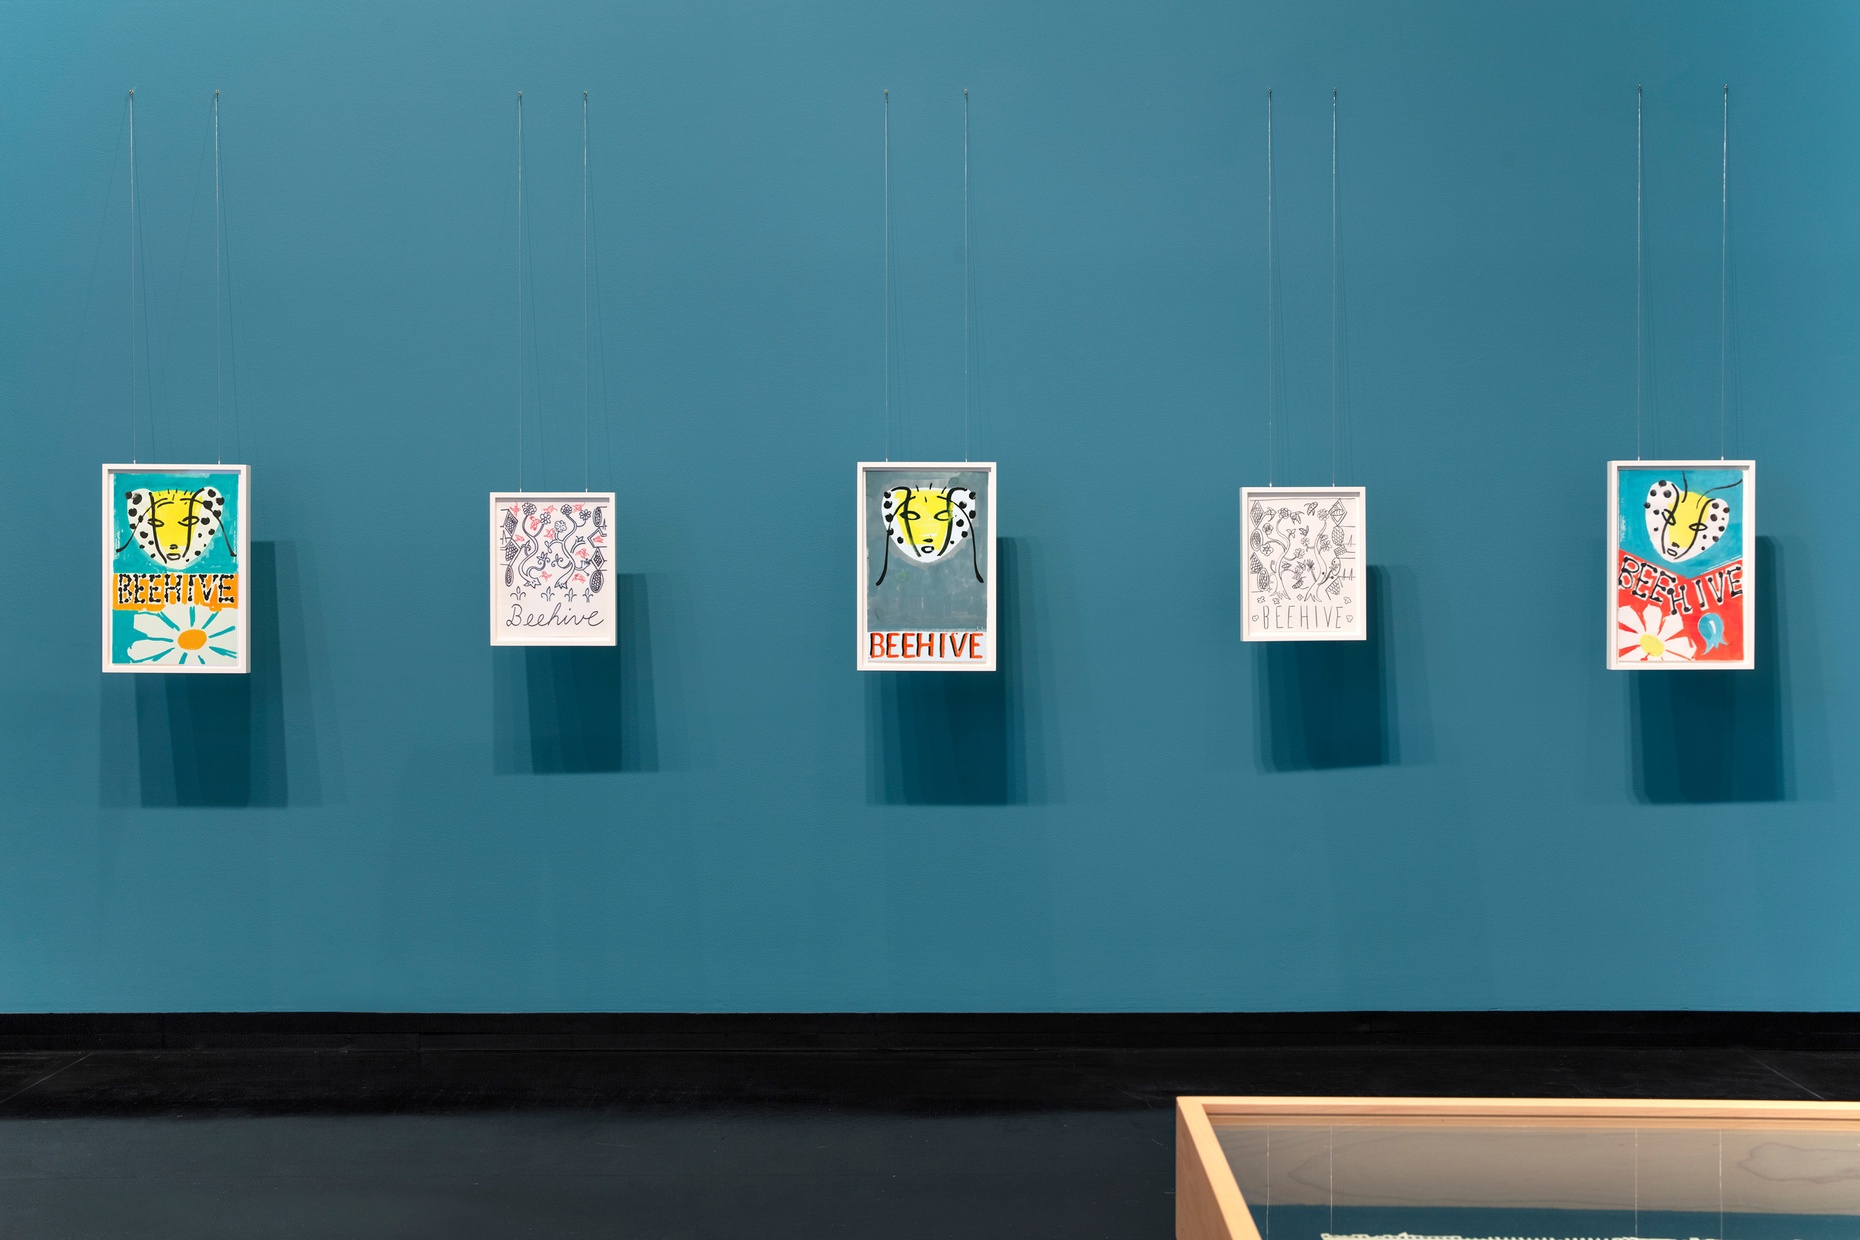 Framed drawings by Frank Moore hanging against a blue wall